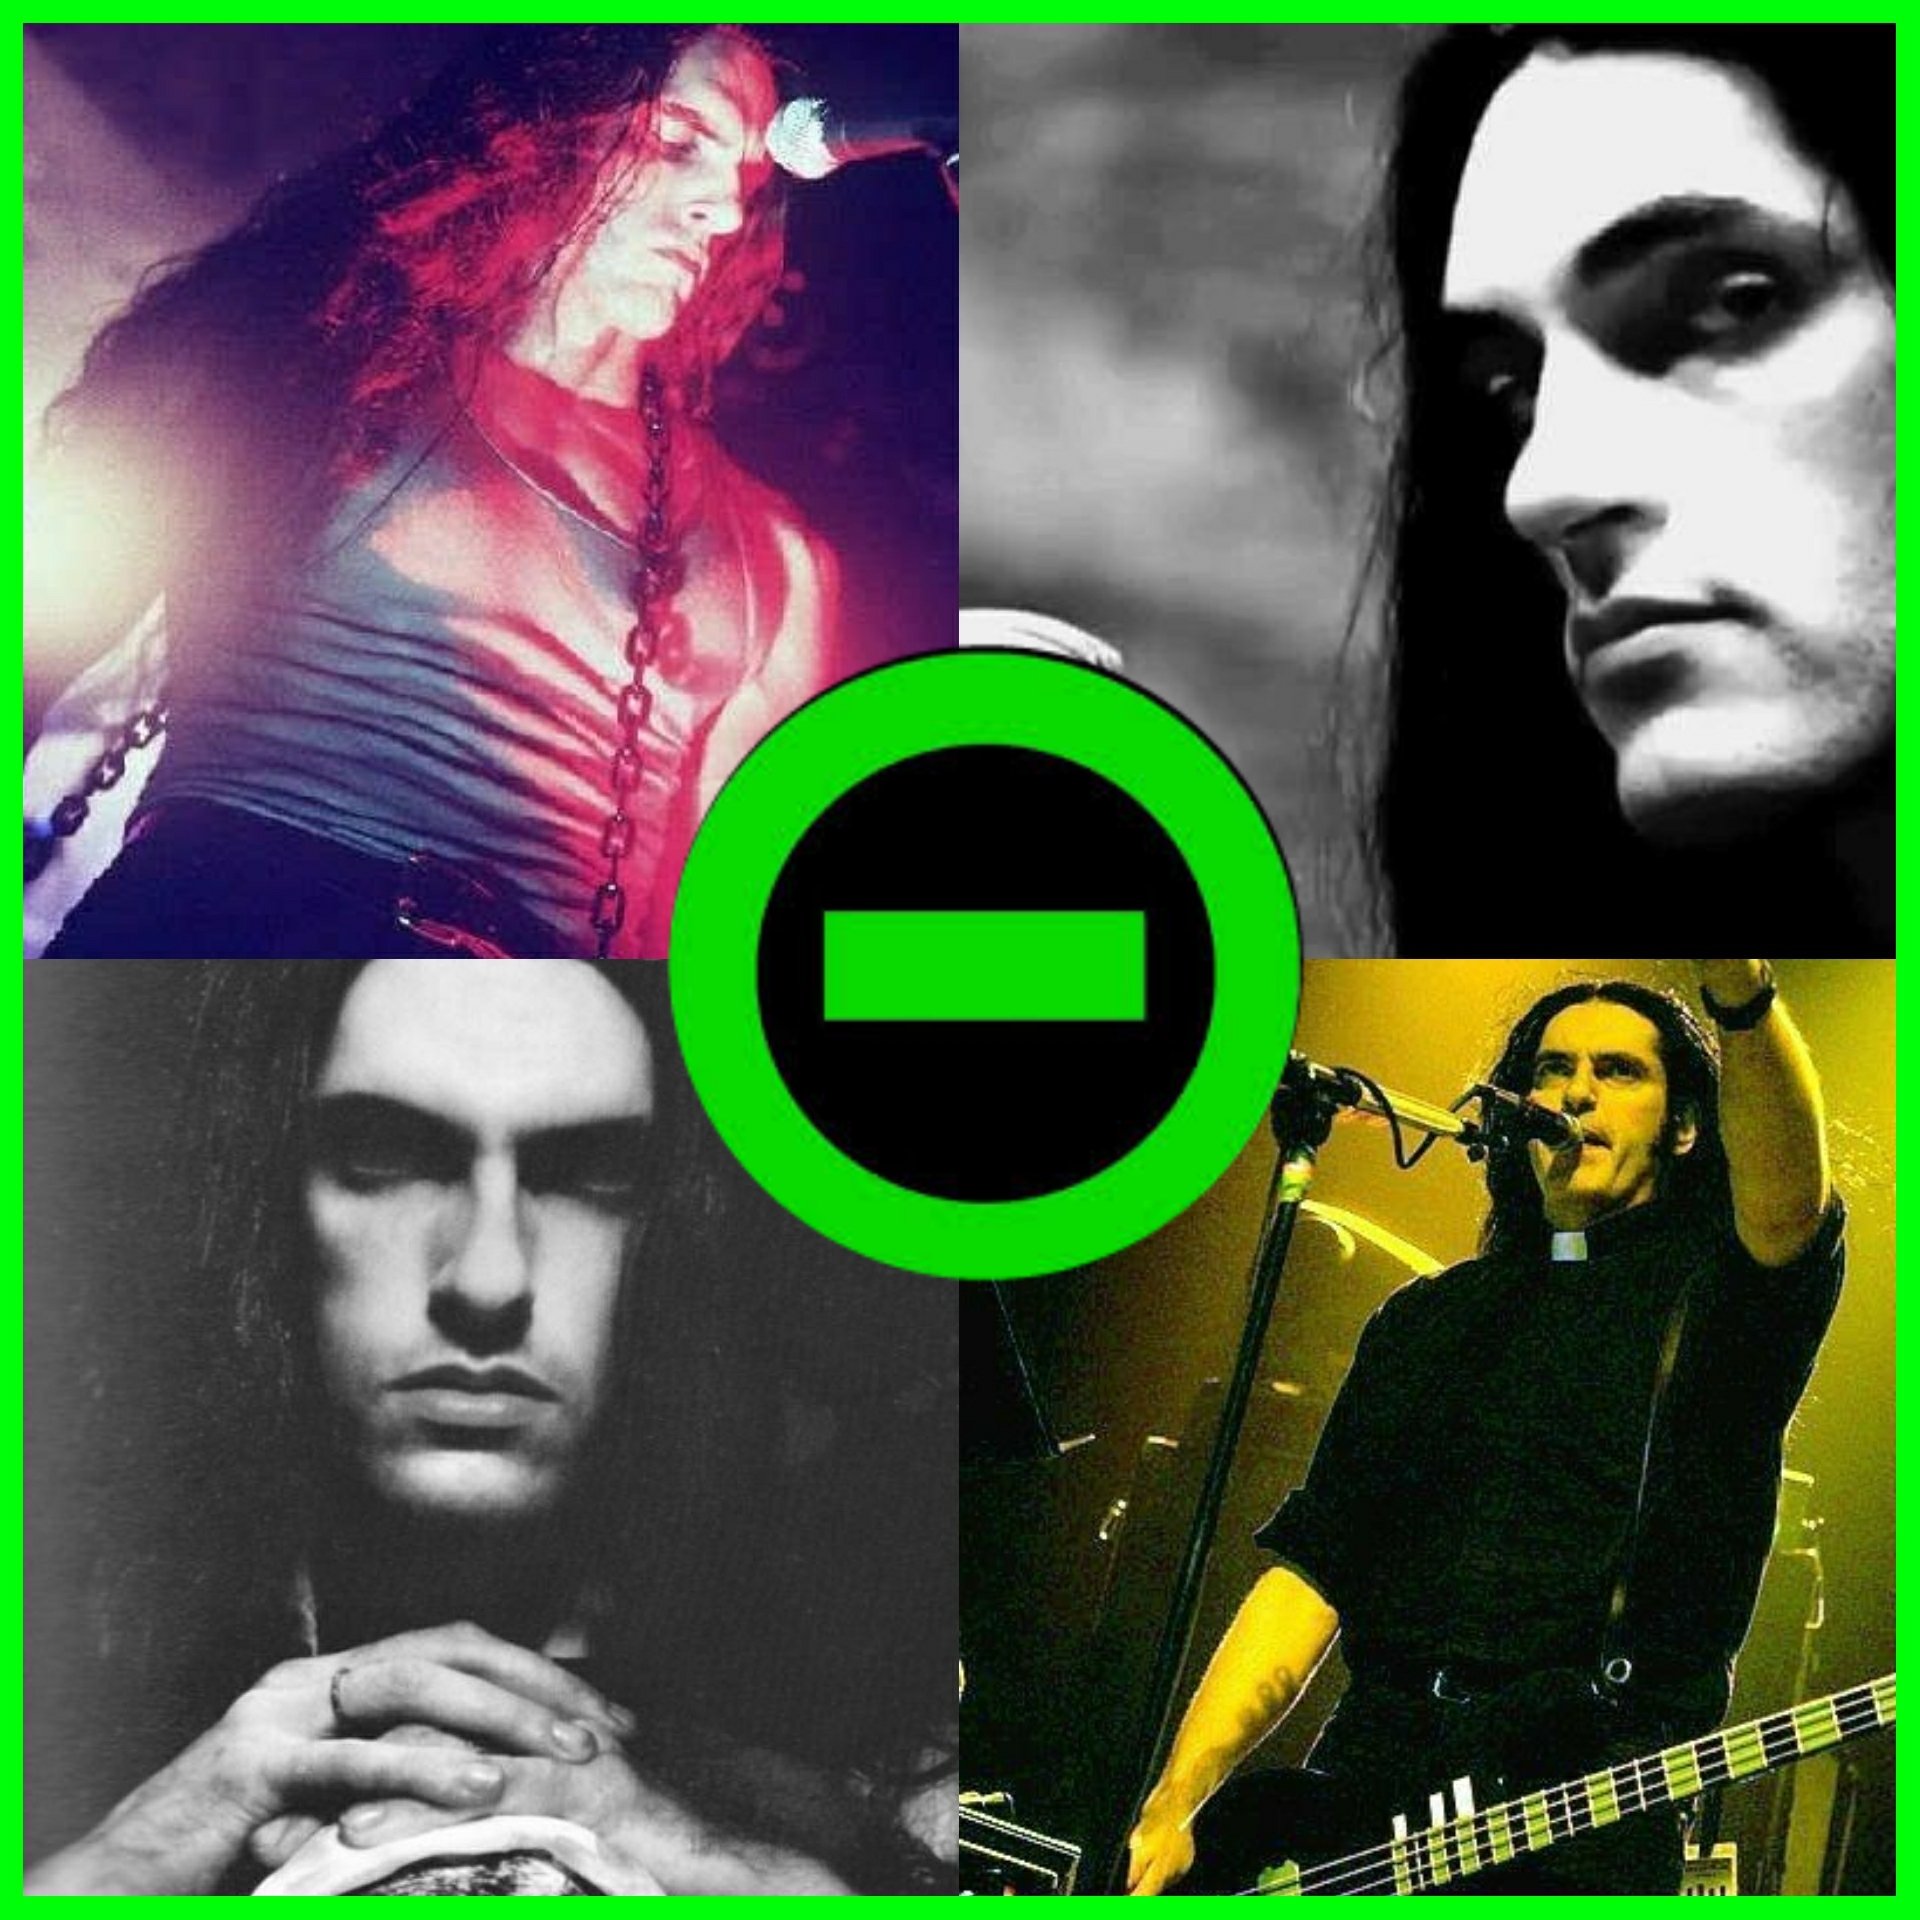 Happy birthday to the great Peter Steele Forever in our hearts.  